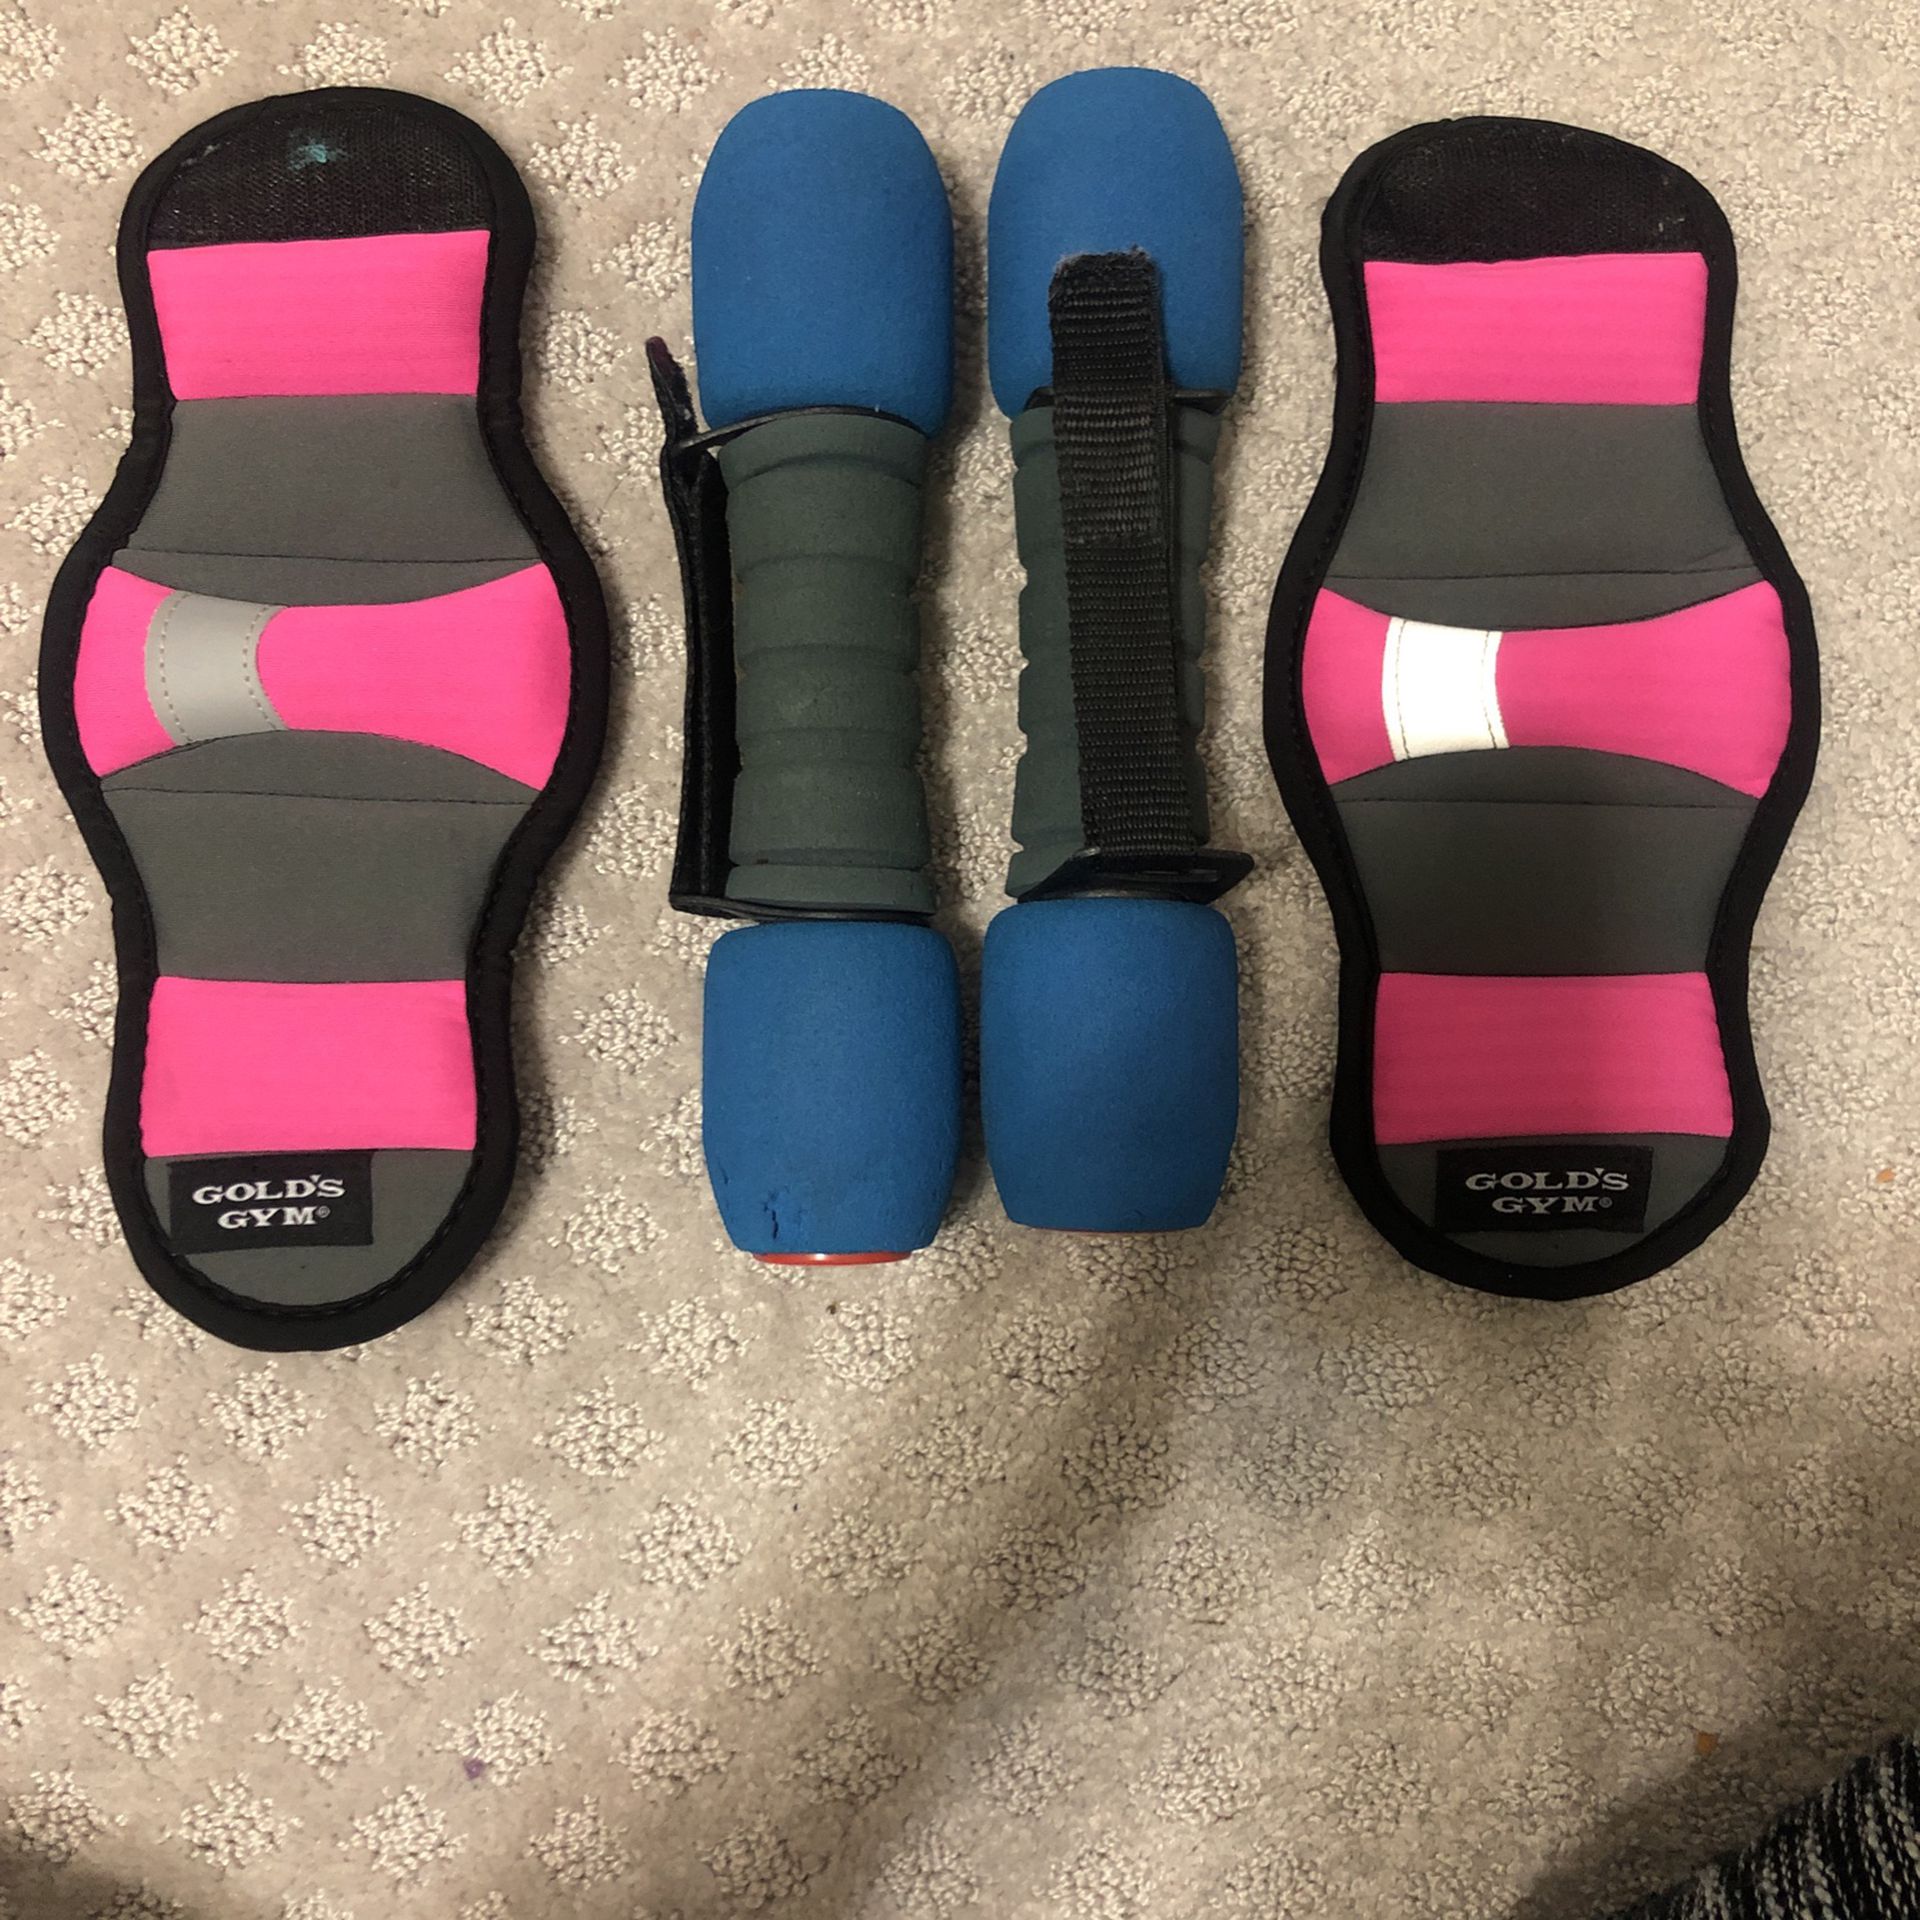 ARM AND HAND WEIGHTS!